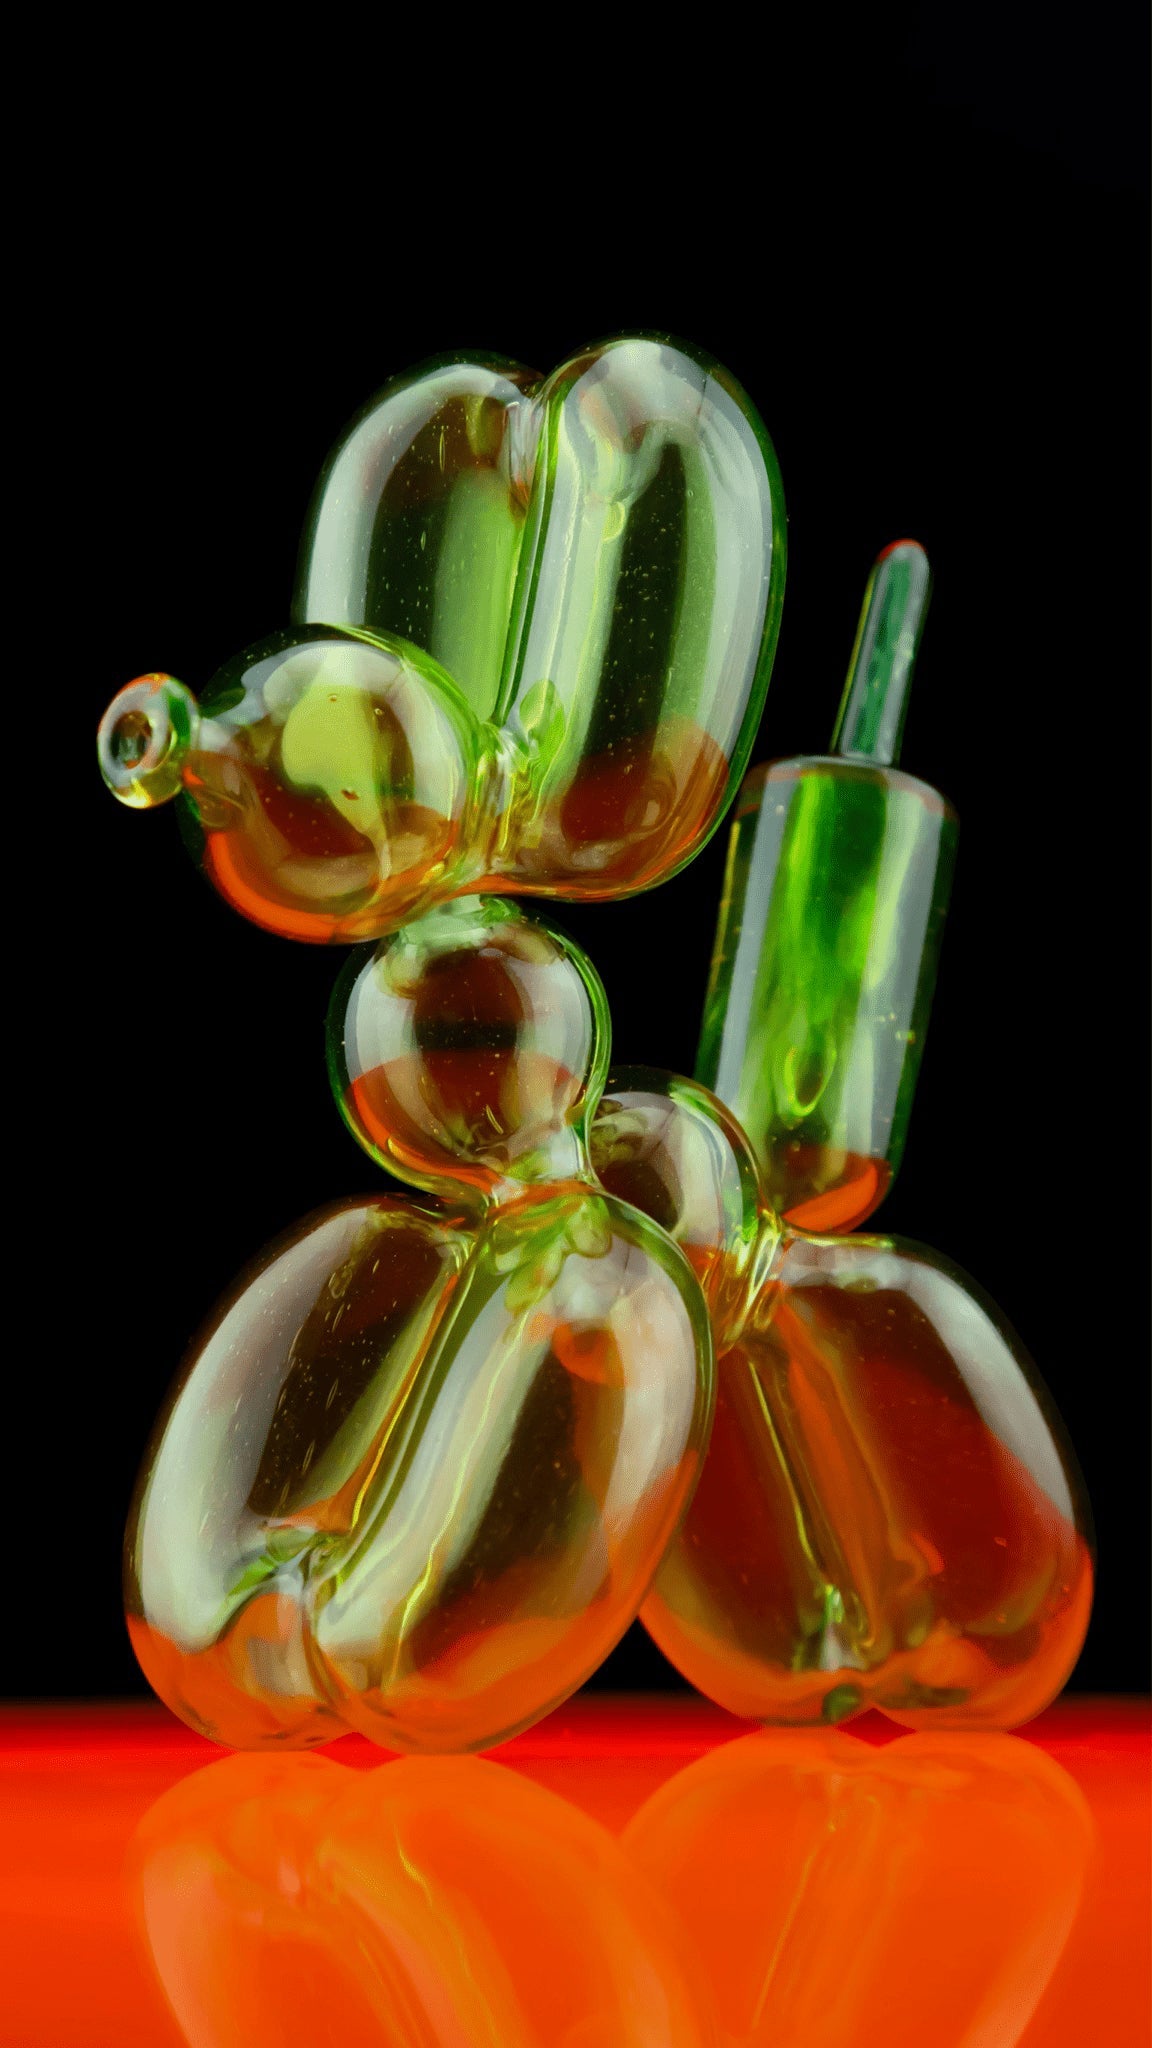 artisan-crafted design of the UV Reactive Citrine Full Size Balloon Dog Rig by Blitzkriega